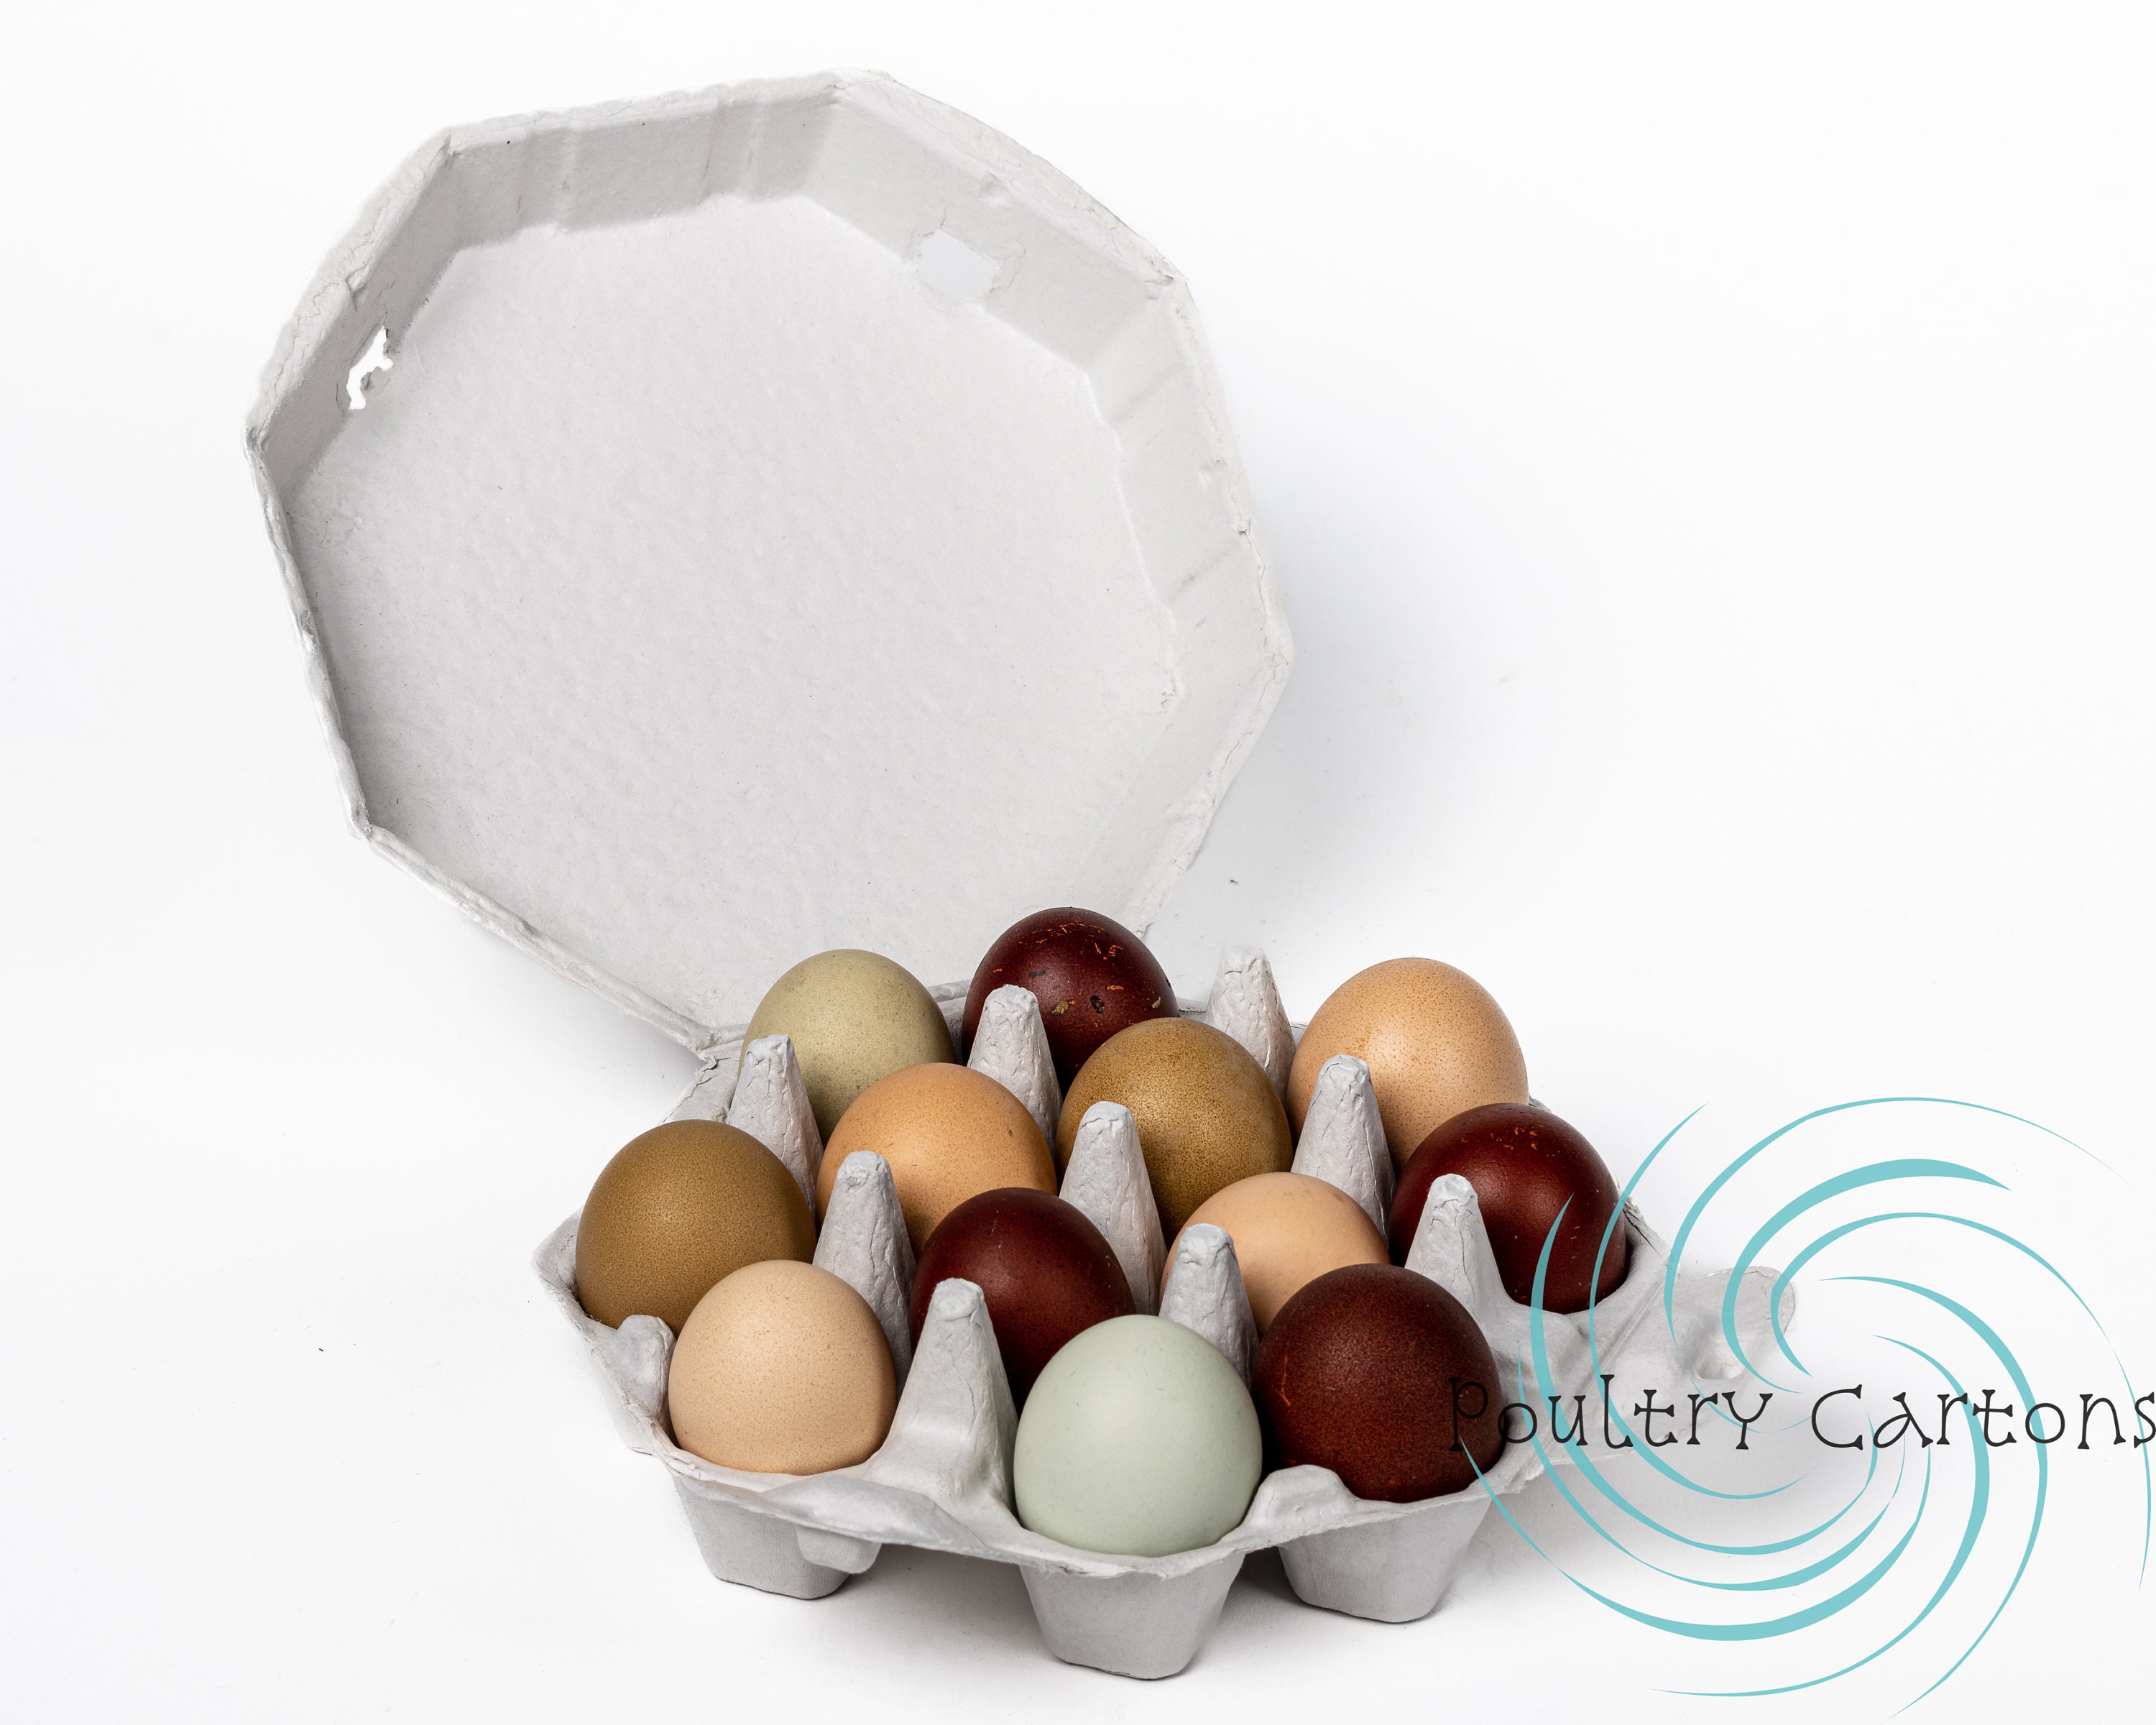 MT Products Blank Natural Pulp Egg Cartons Bulk Holds Up to Twelve Eggs - 1  Dozen - Strong Sturdy Egg Crate Cardboard Material Perfect For Storing